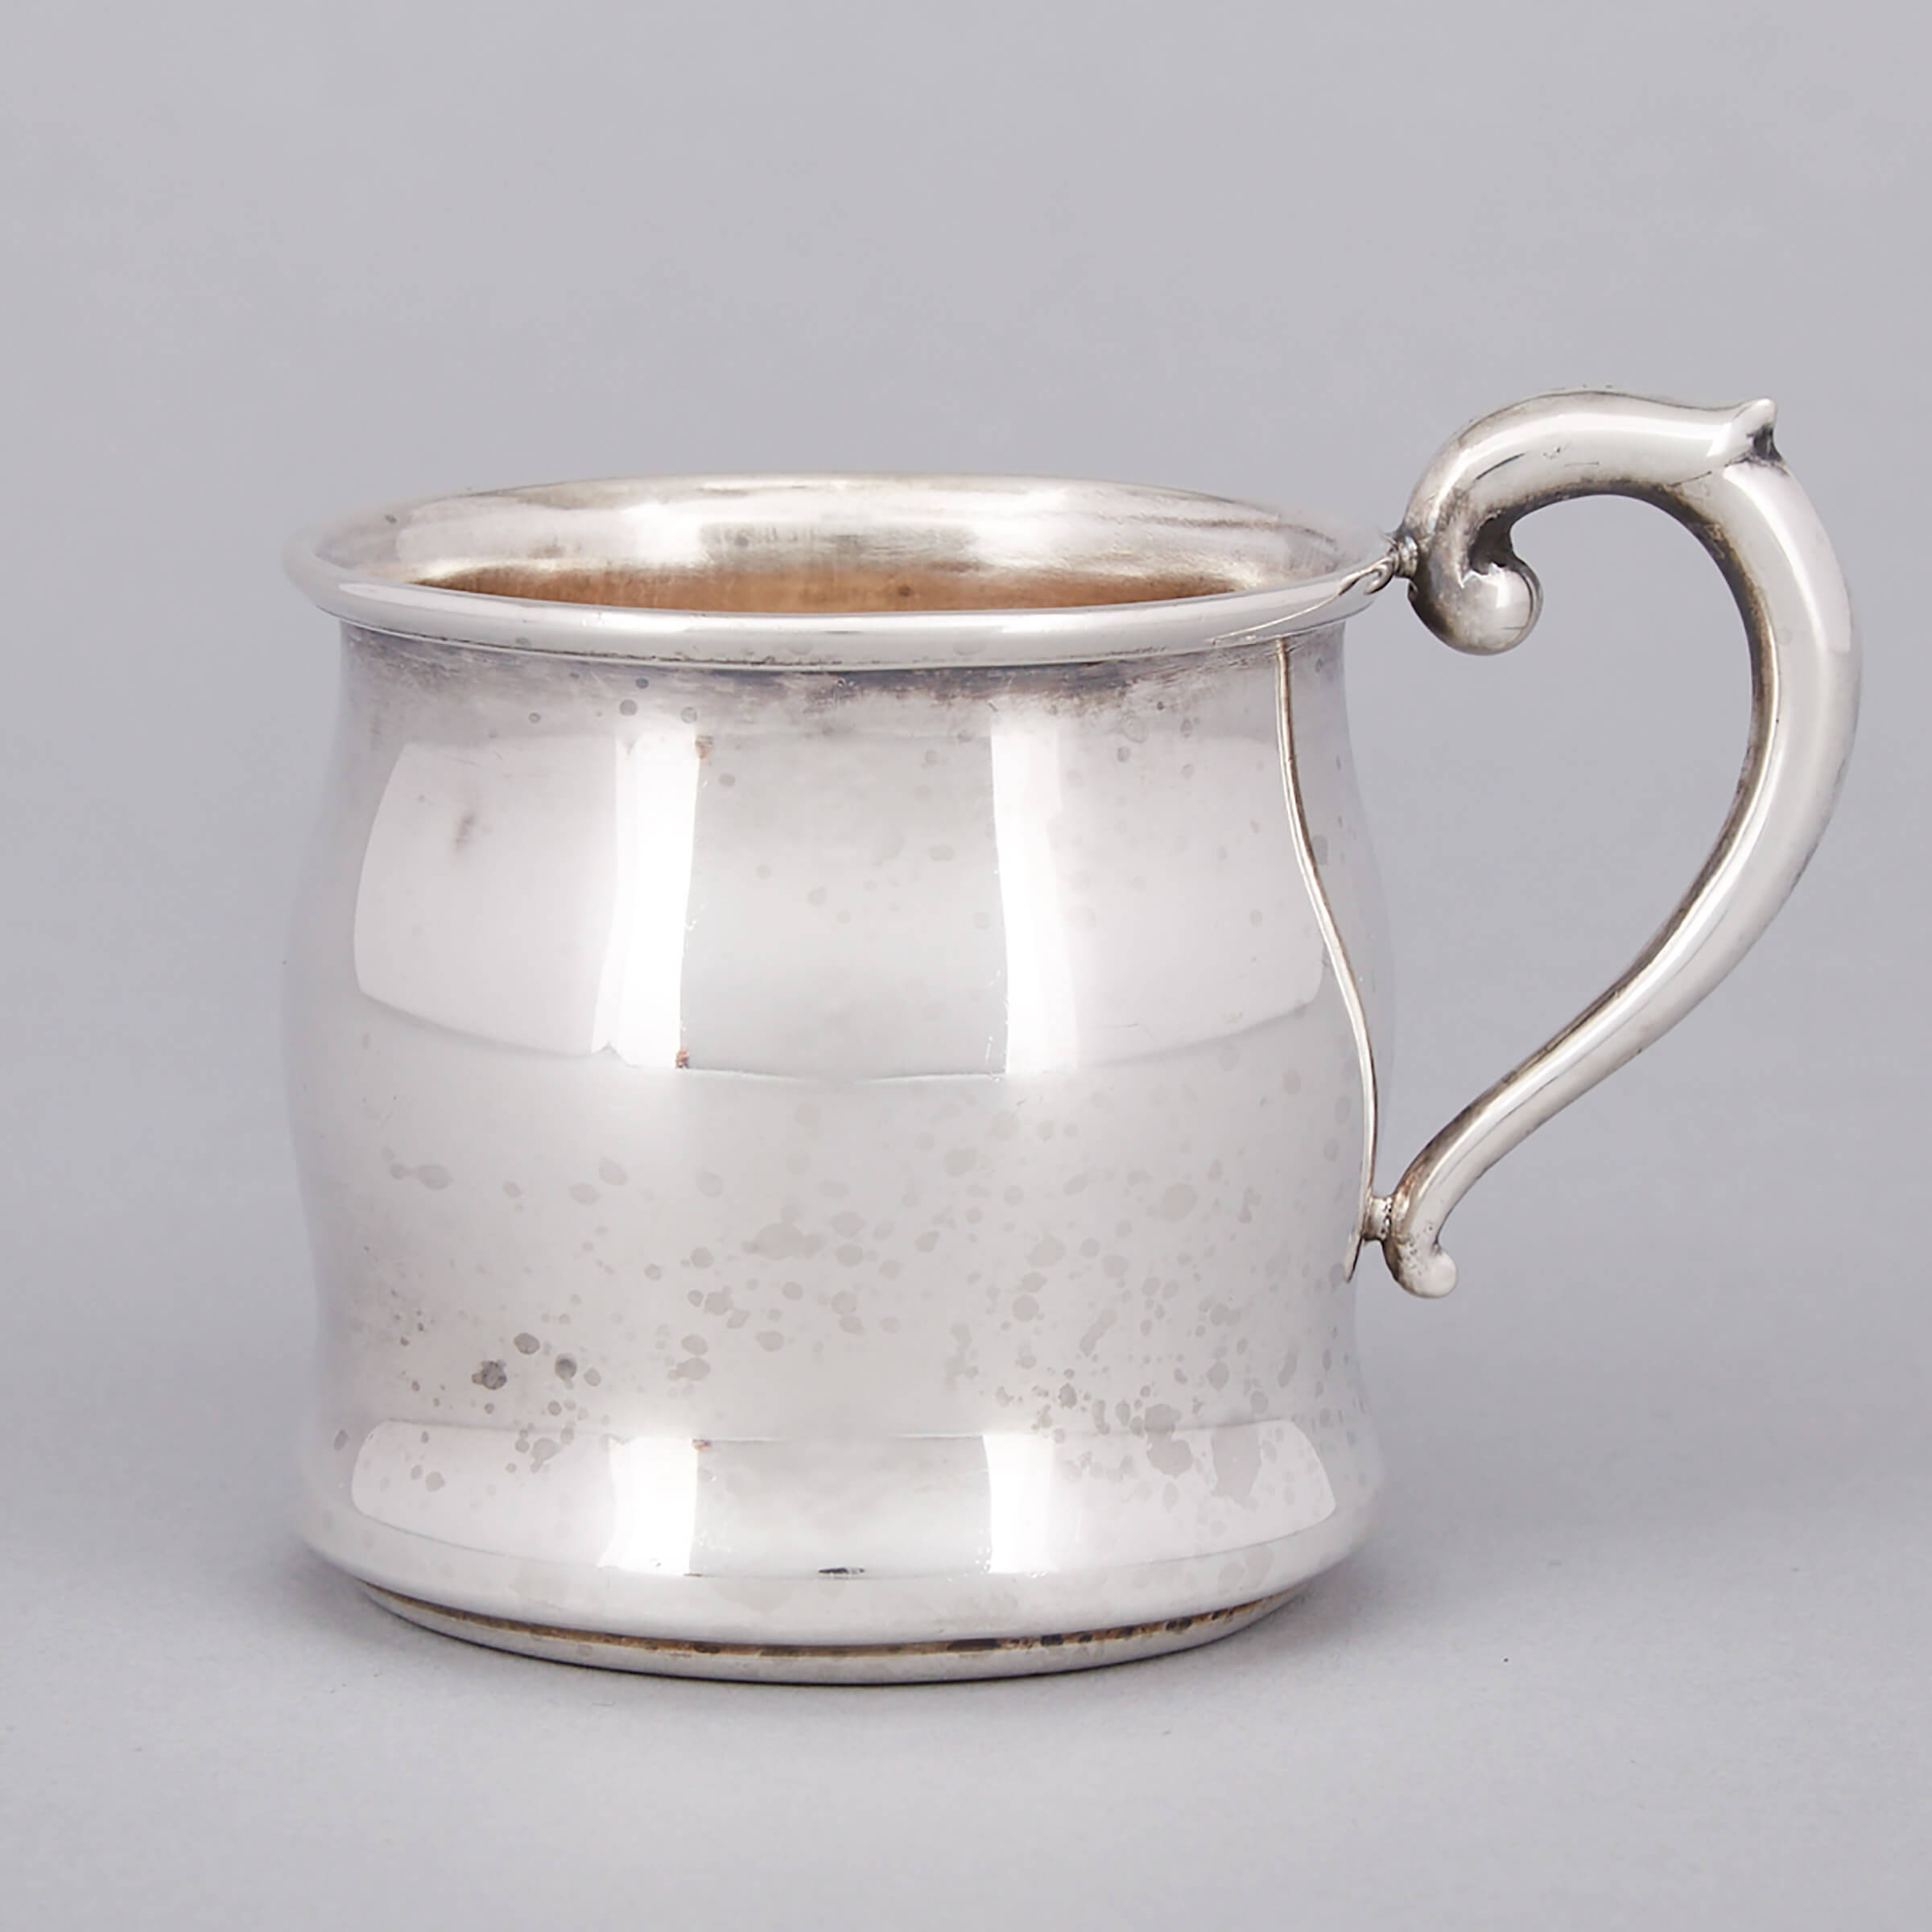 Canadian Silver Small Mug, Carl Poul Petersen, Montreal, Que., mid-20th century